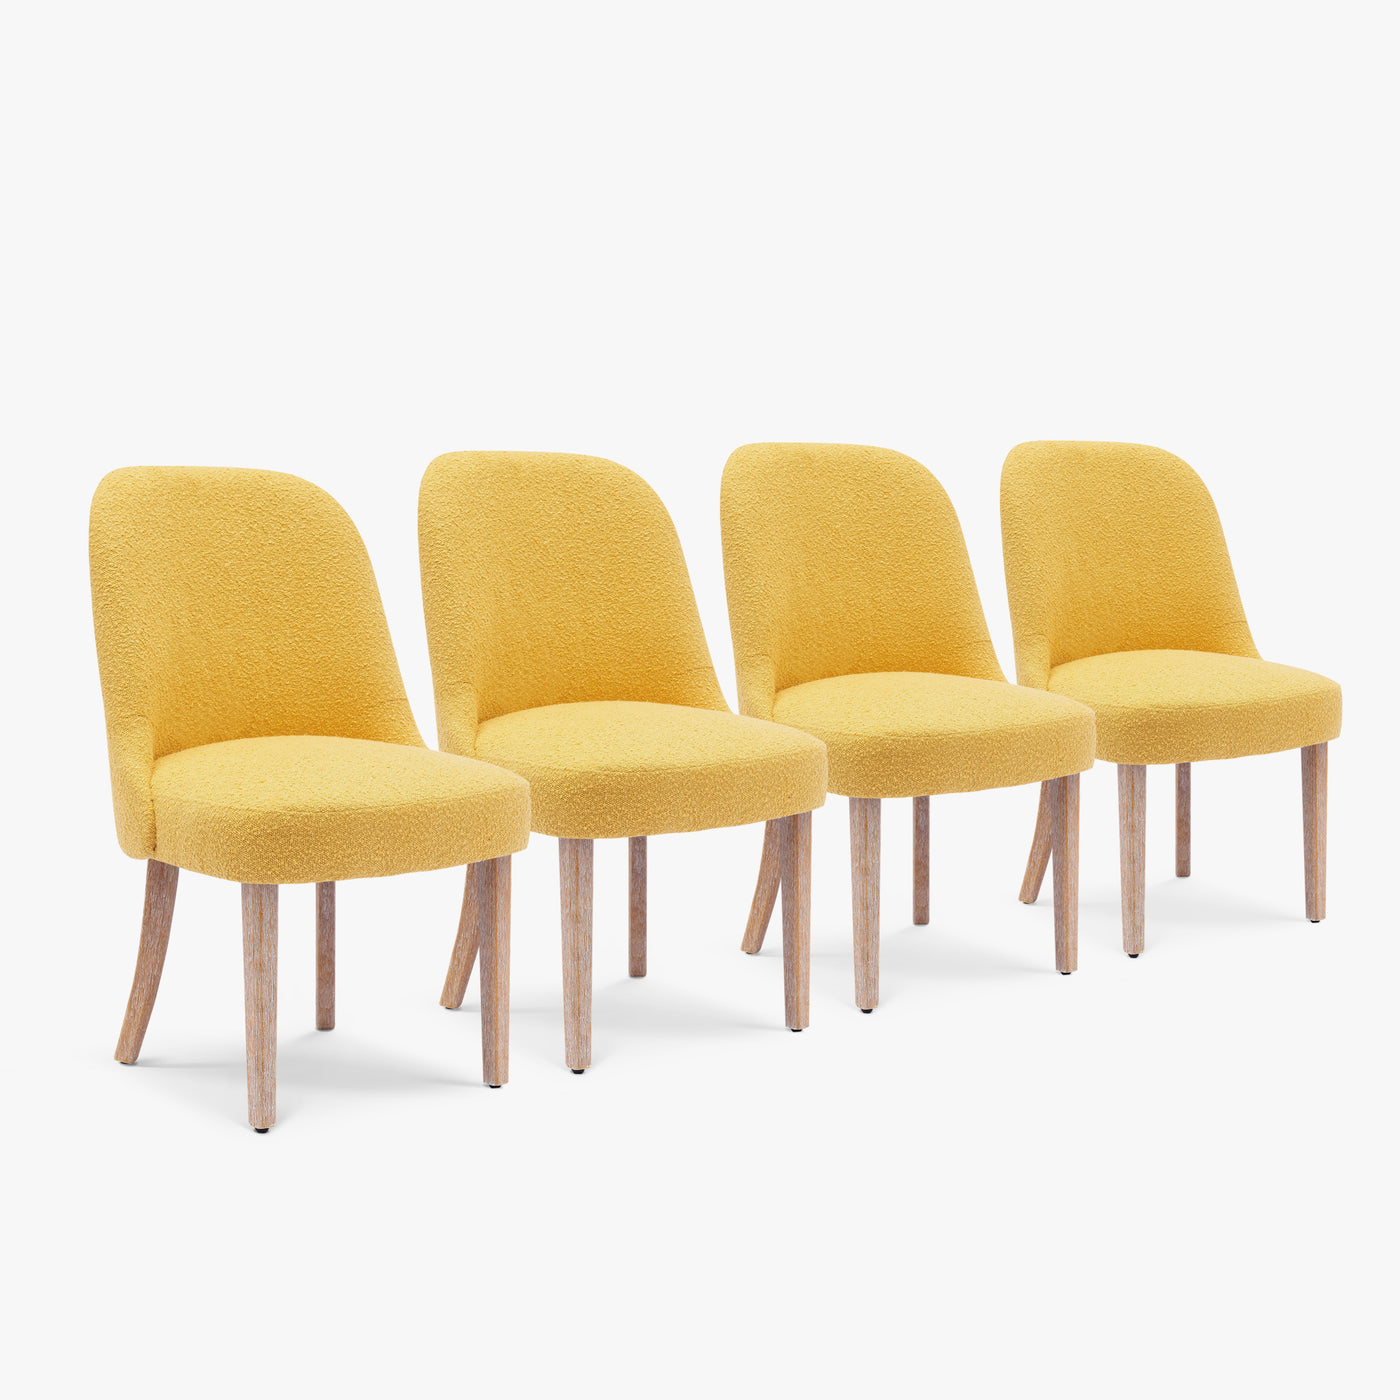 Genevieve Mid-Century Modern Upholstered Boucle Dining Chair (Set of 4)